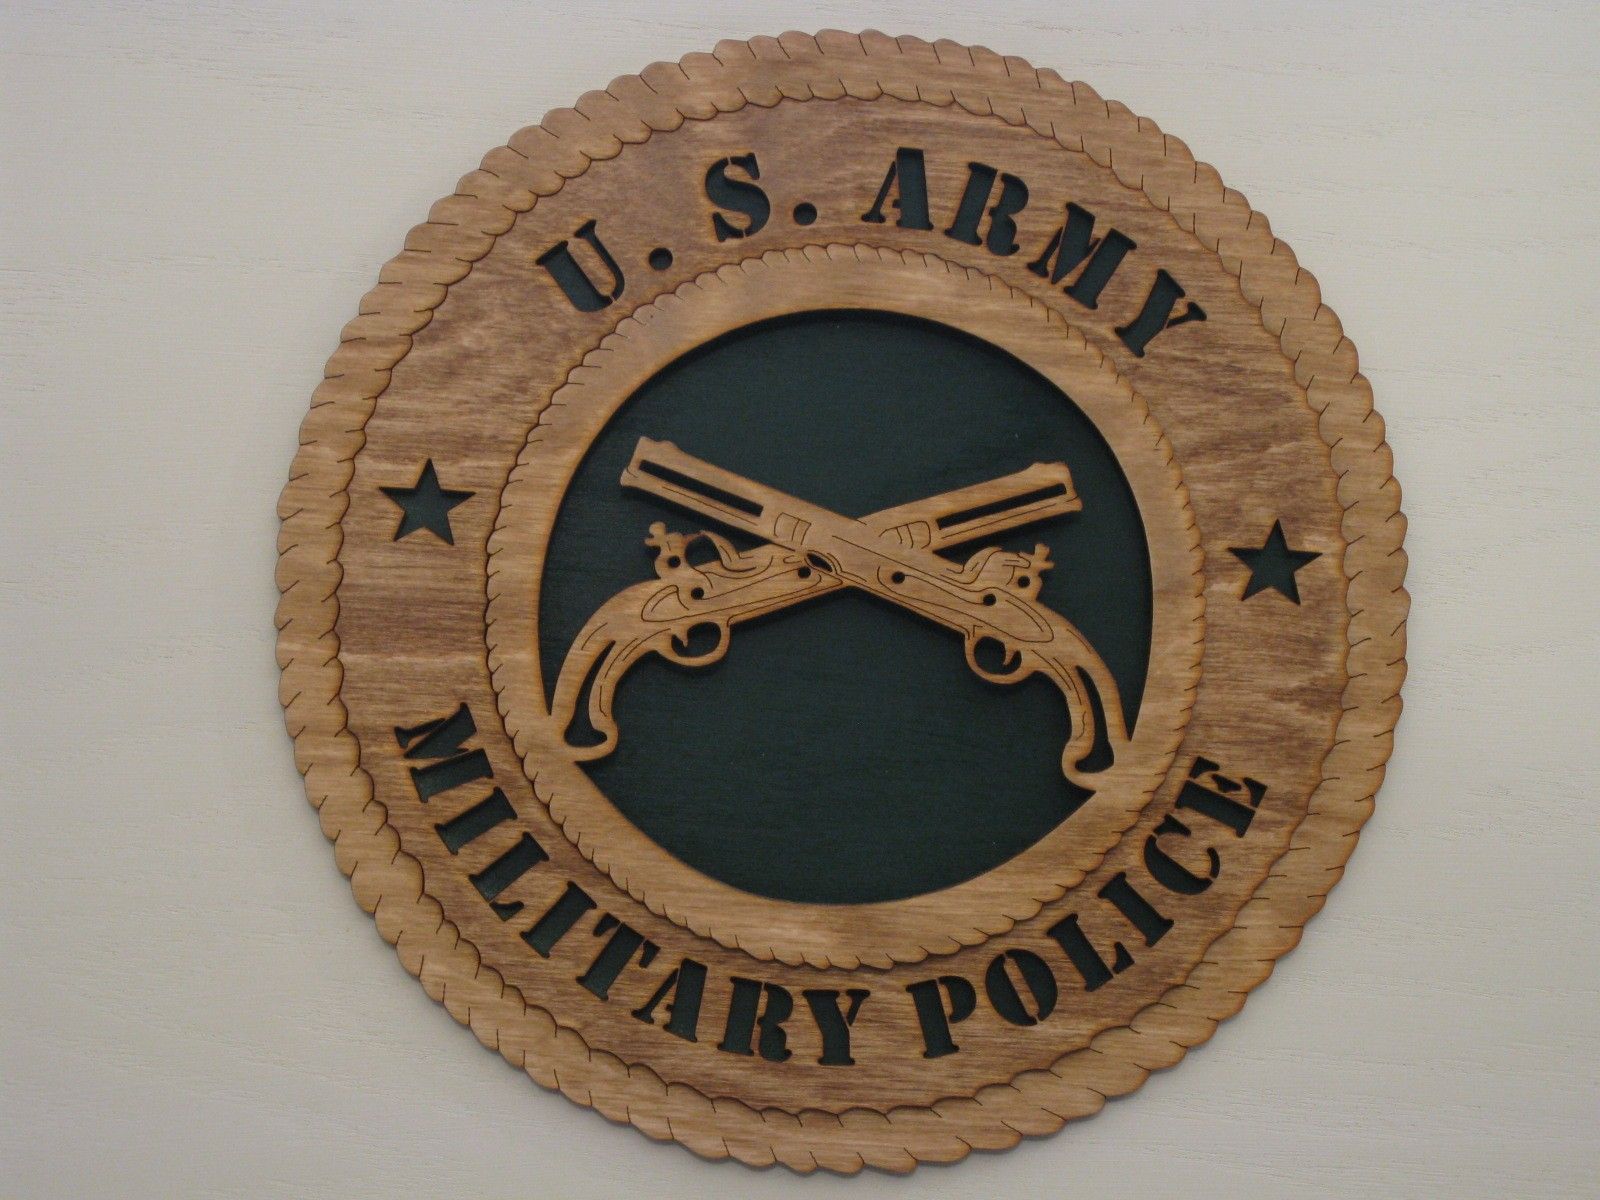 US Army Military Police Wallpaper